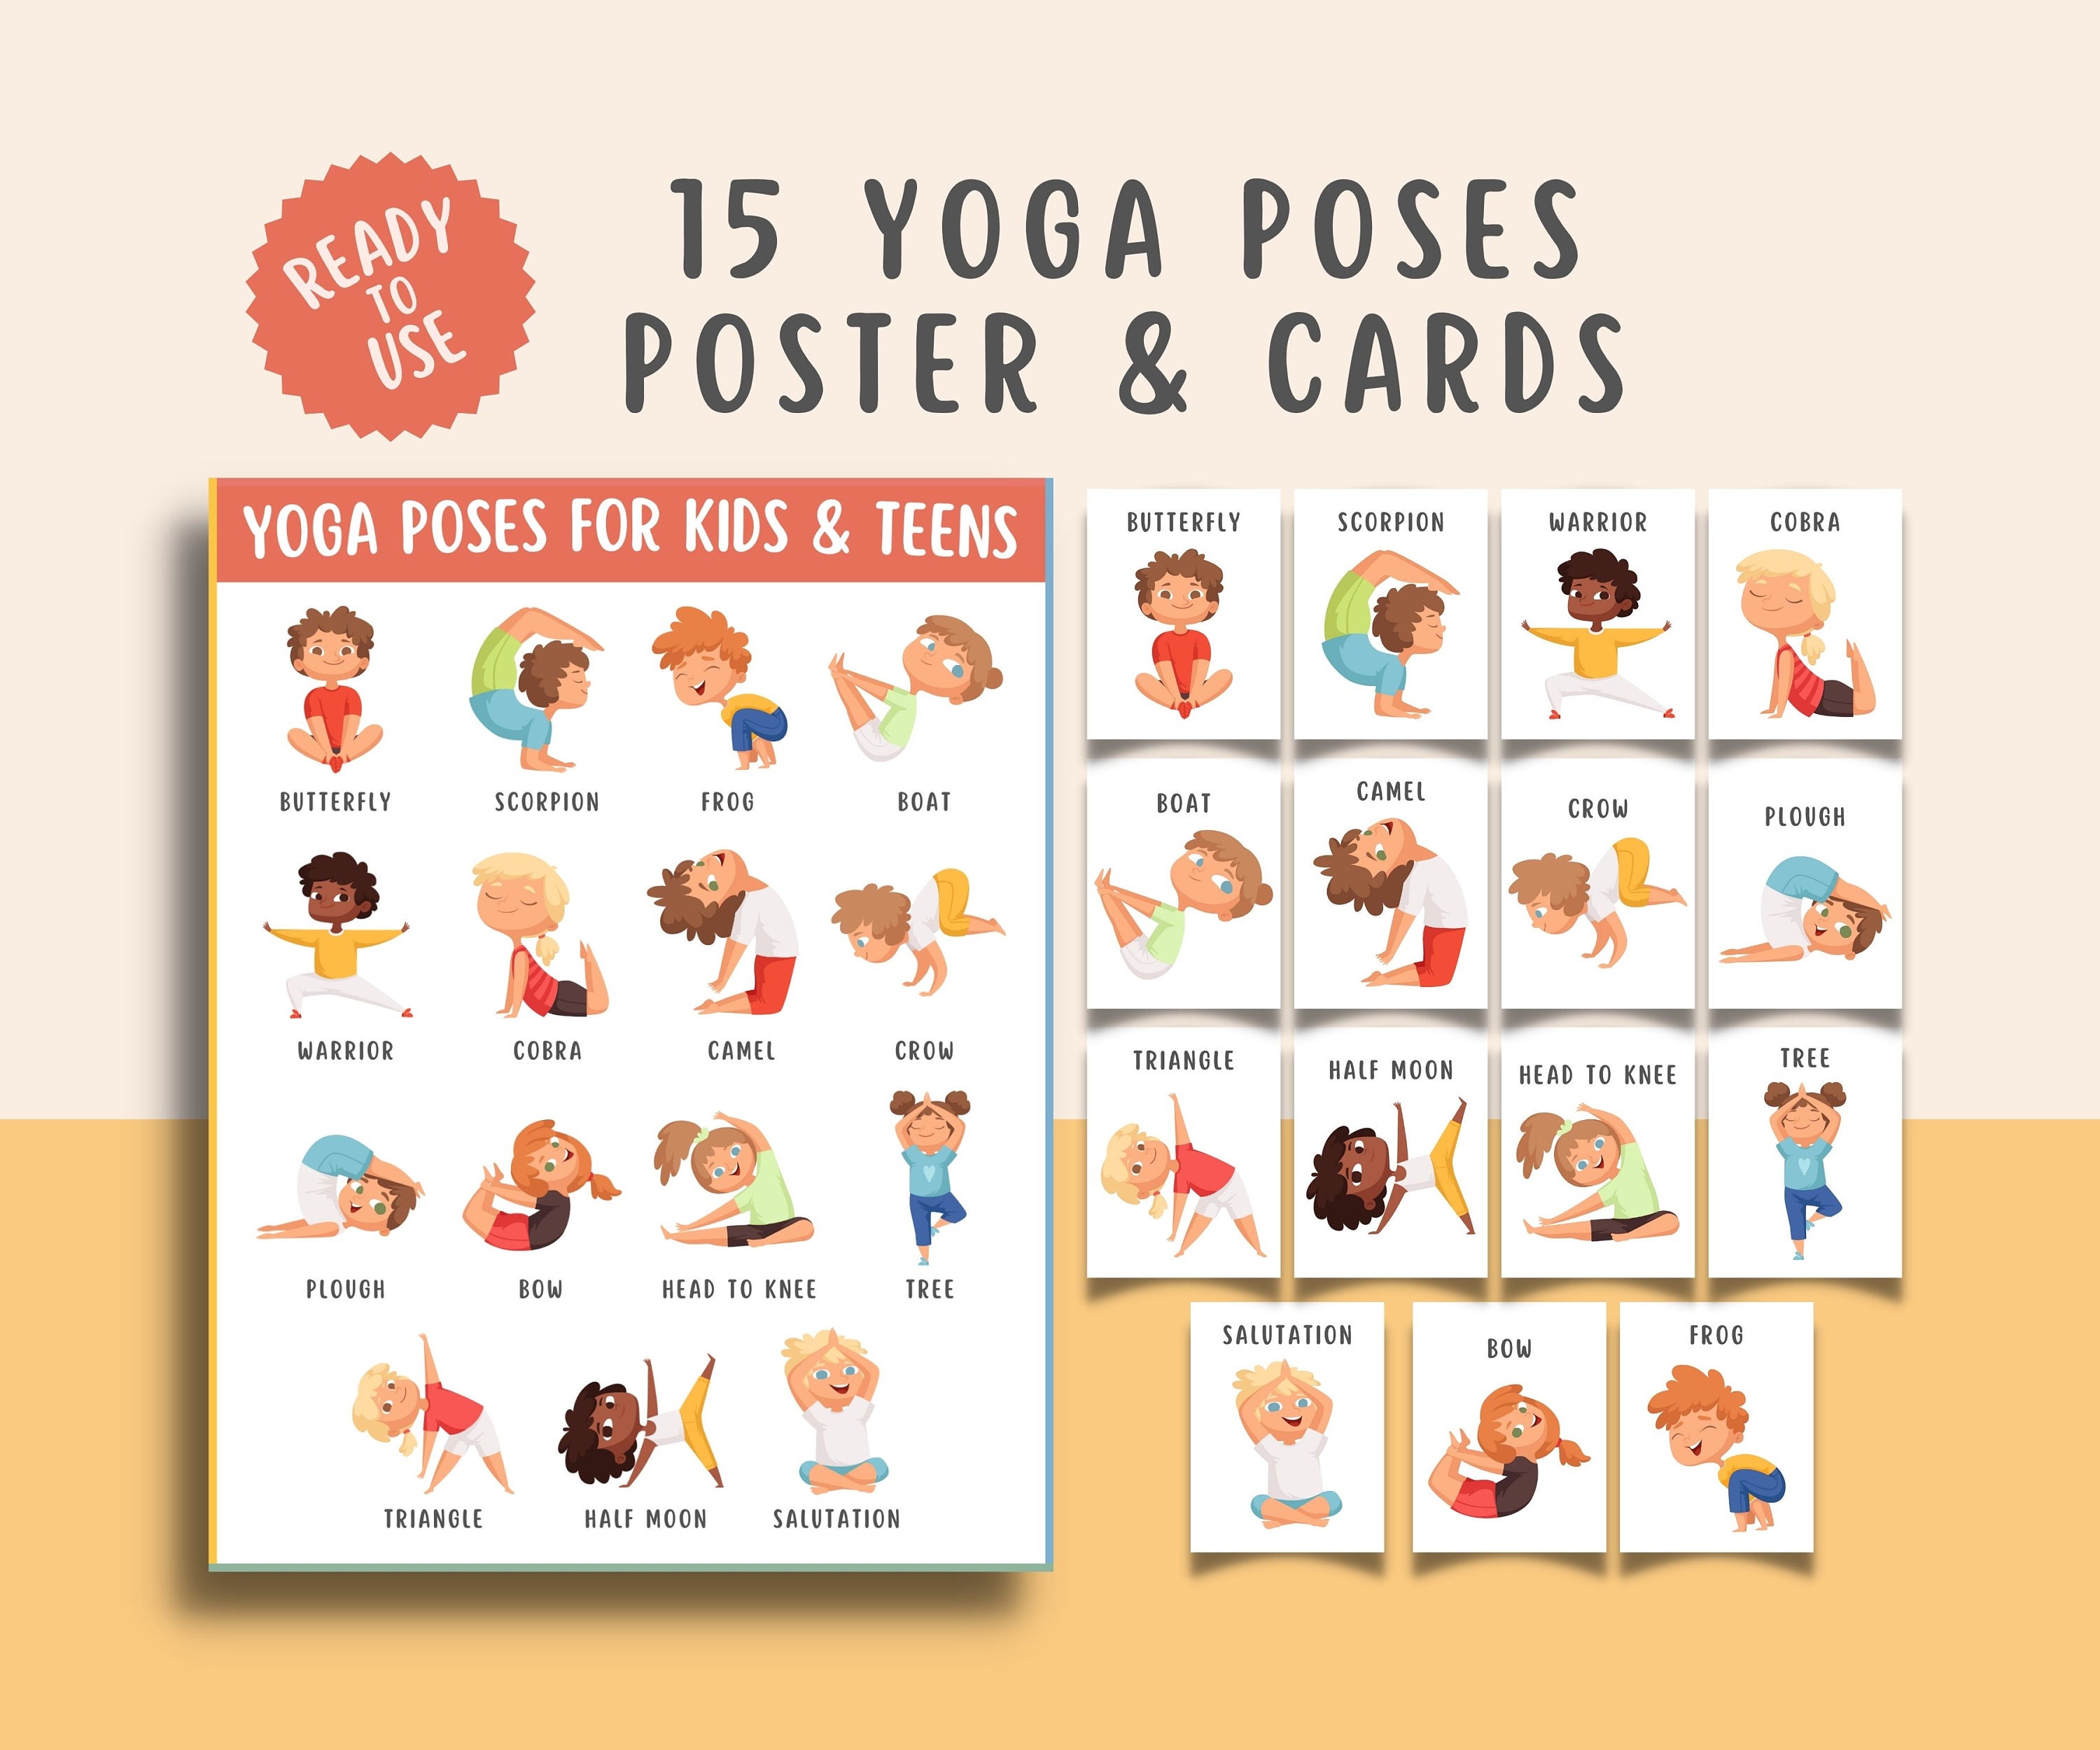 Yoga for Feelings 5 Pack of Yoga Pose Sequences to Guide You or Your  Clients Through Emotions Coping Skills, Yoga Therapy Handouts 